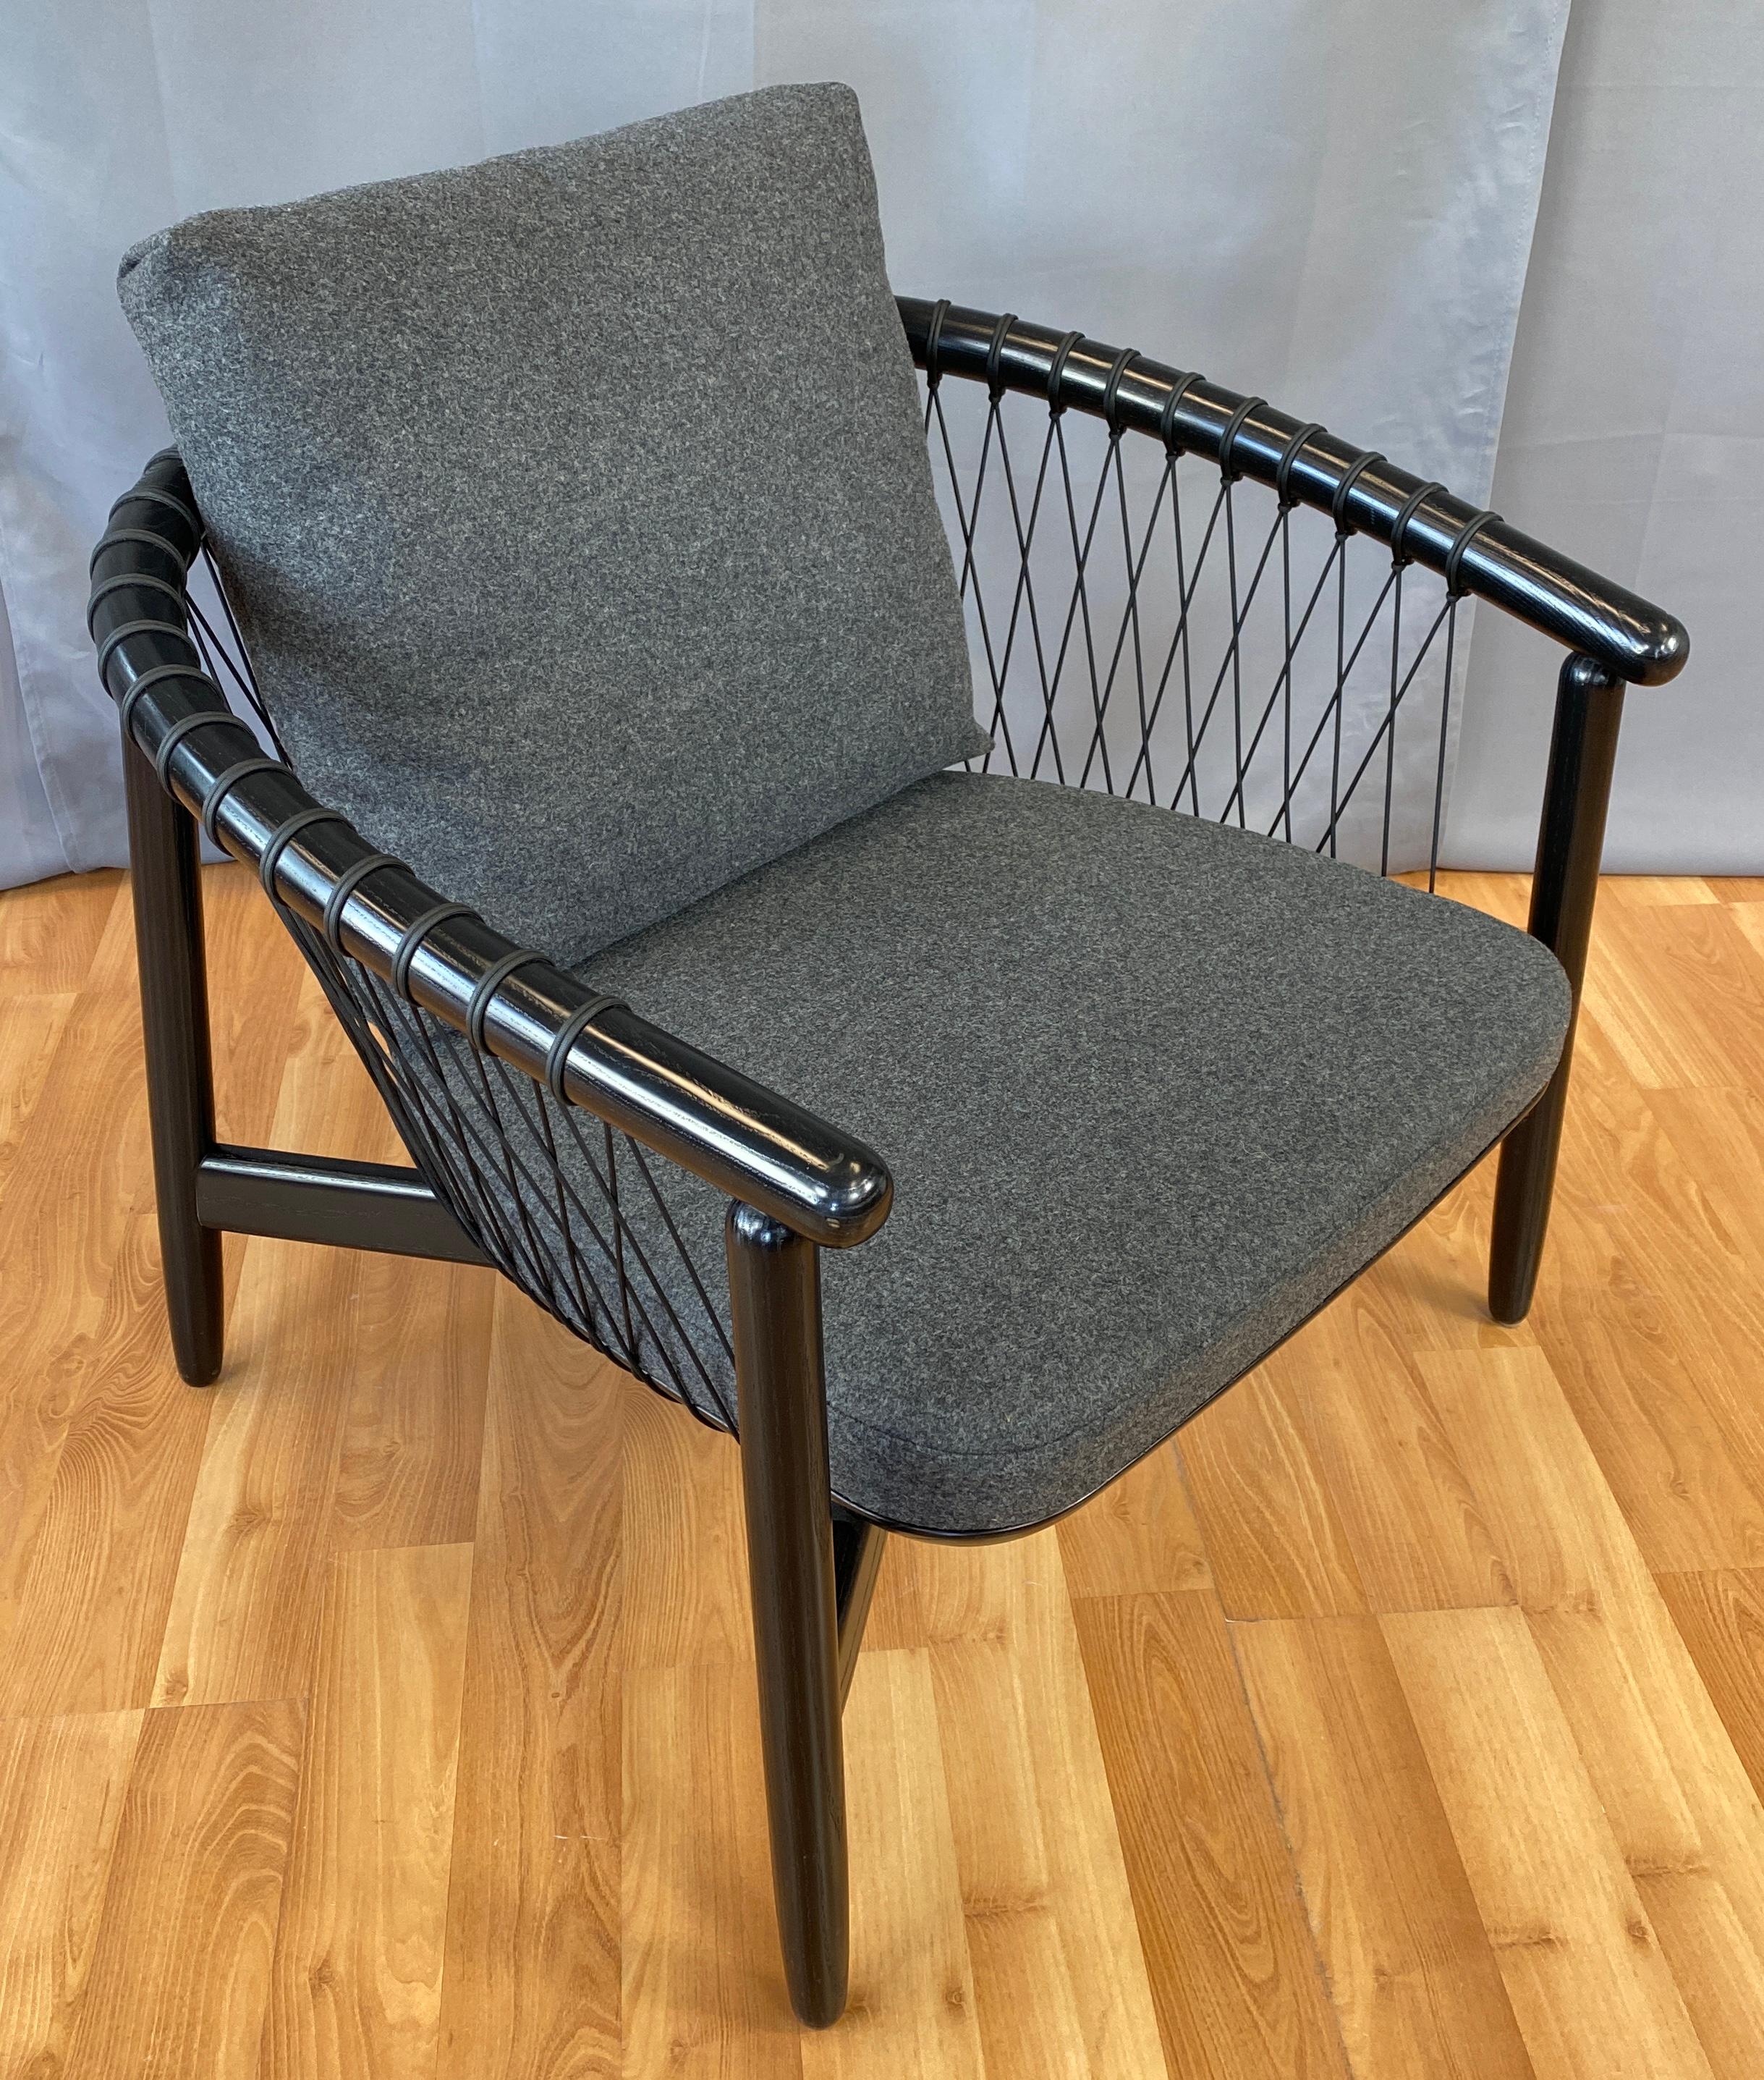 Crosshatch Chair Designed by Eoos for Geiger from Herman Miller 1